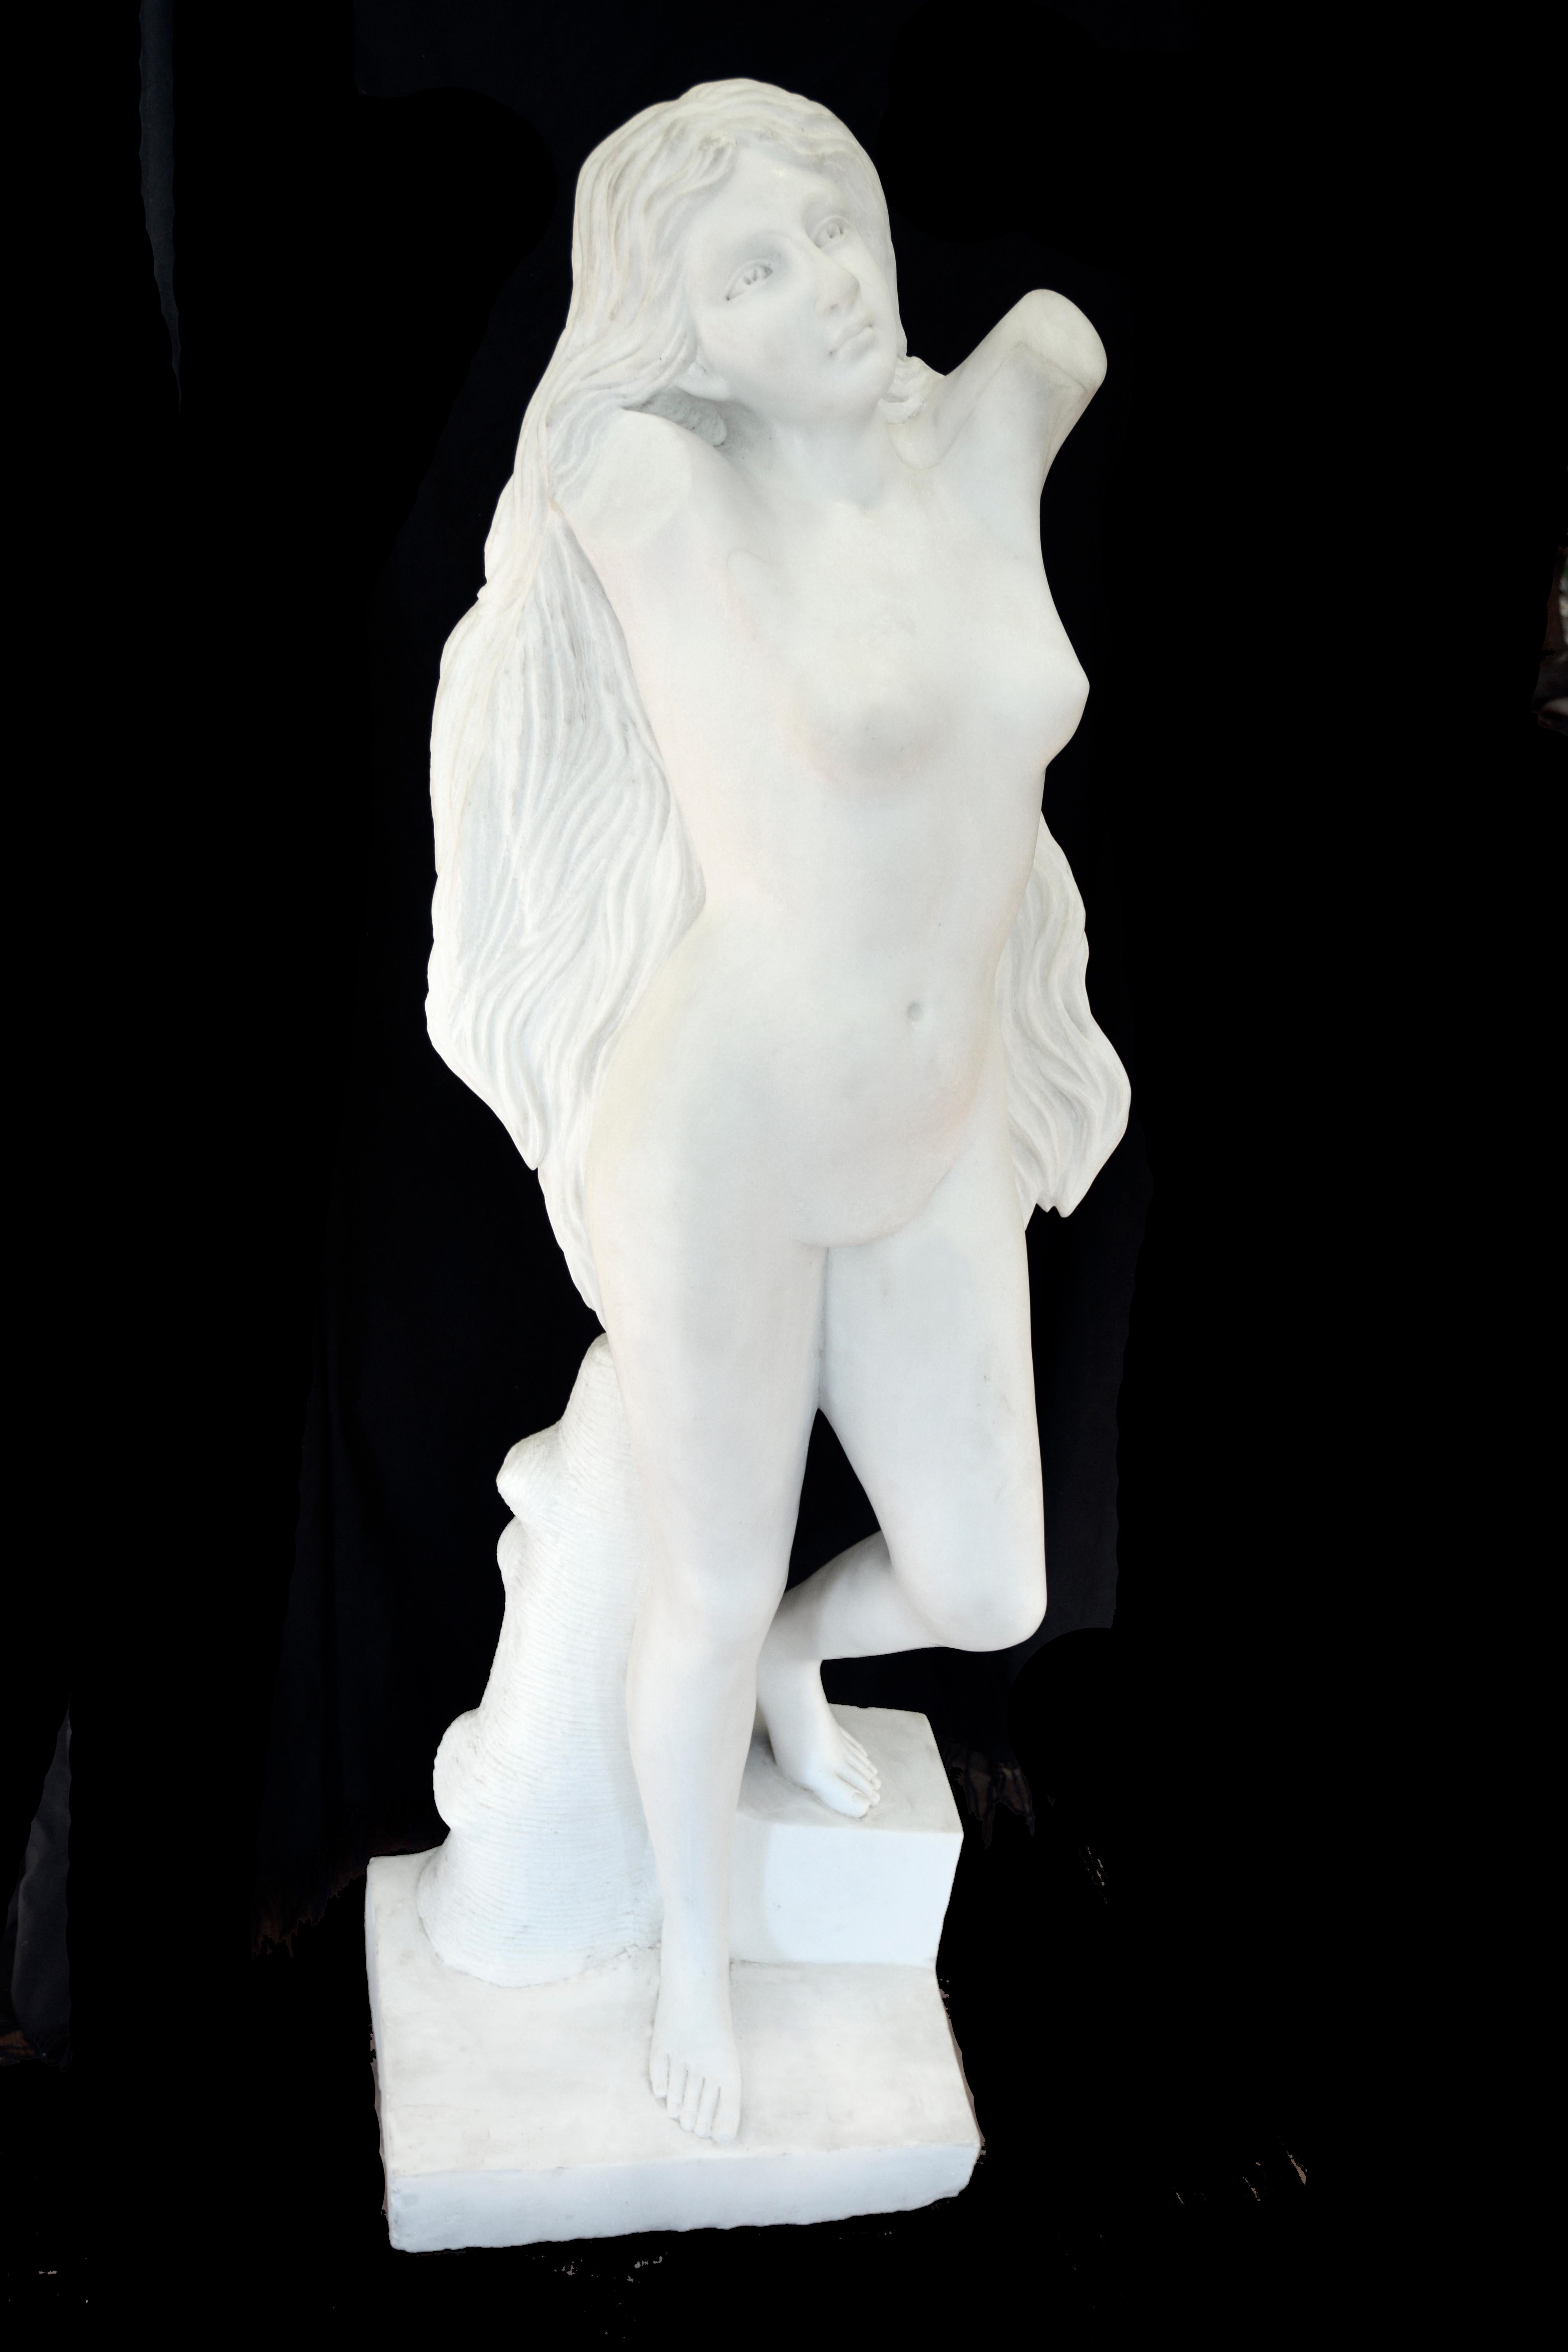 Monumental Carrara Statue of Venus by M. Passini. Professor Passini was an artist in the 19th century Italy. Lovely white marble statue of the Roman Goddess Venus 
Venus is named after the Roman goddess of love and peace. Size, 59